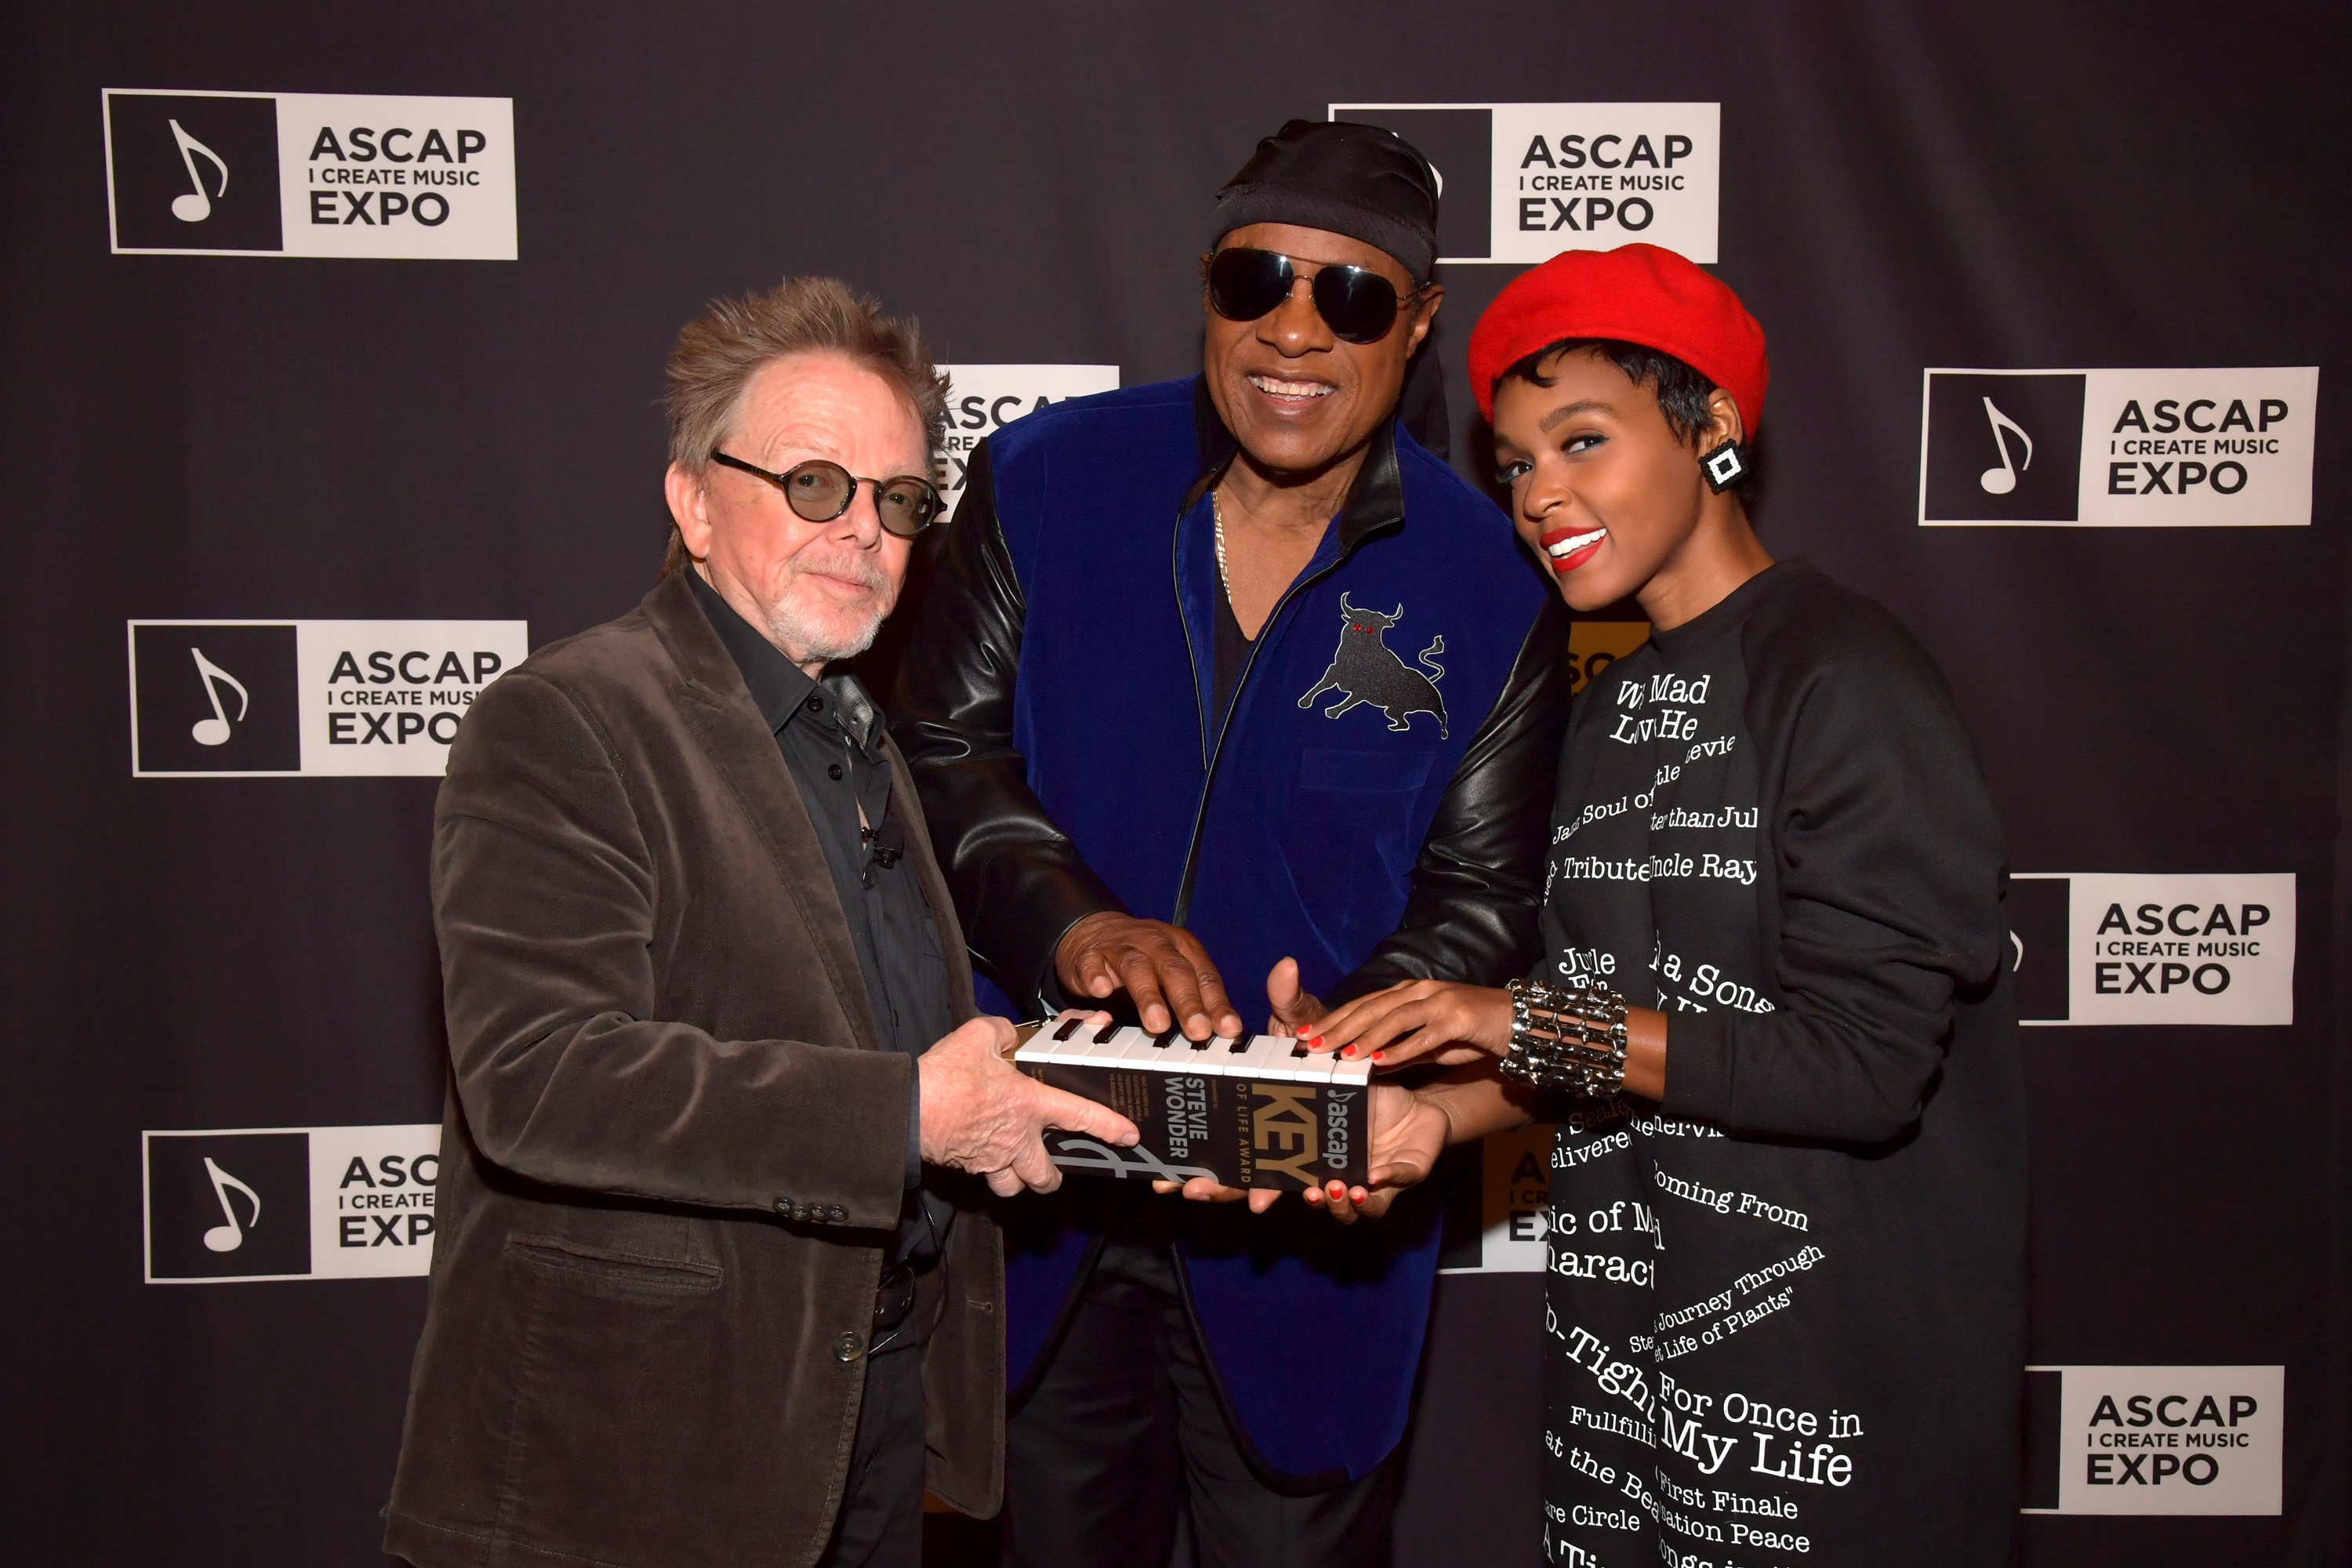 LOS ANGELES, CA - APRIL 15:  (L-R) ASCAP President Paul Williams and musicians Stevie Wonder and Janelle Monae attend Stevie Wonder presented with "Key of Life" Award at the ASCAP "I Create Music" Expo on April 15, 2017 in Los Angeles, California.  (Photo by Lester Cohen/Getty Images for ASCAP )